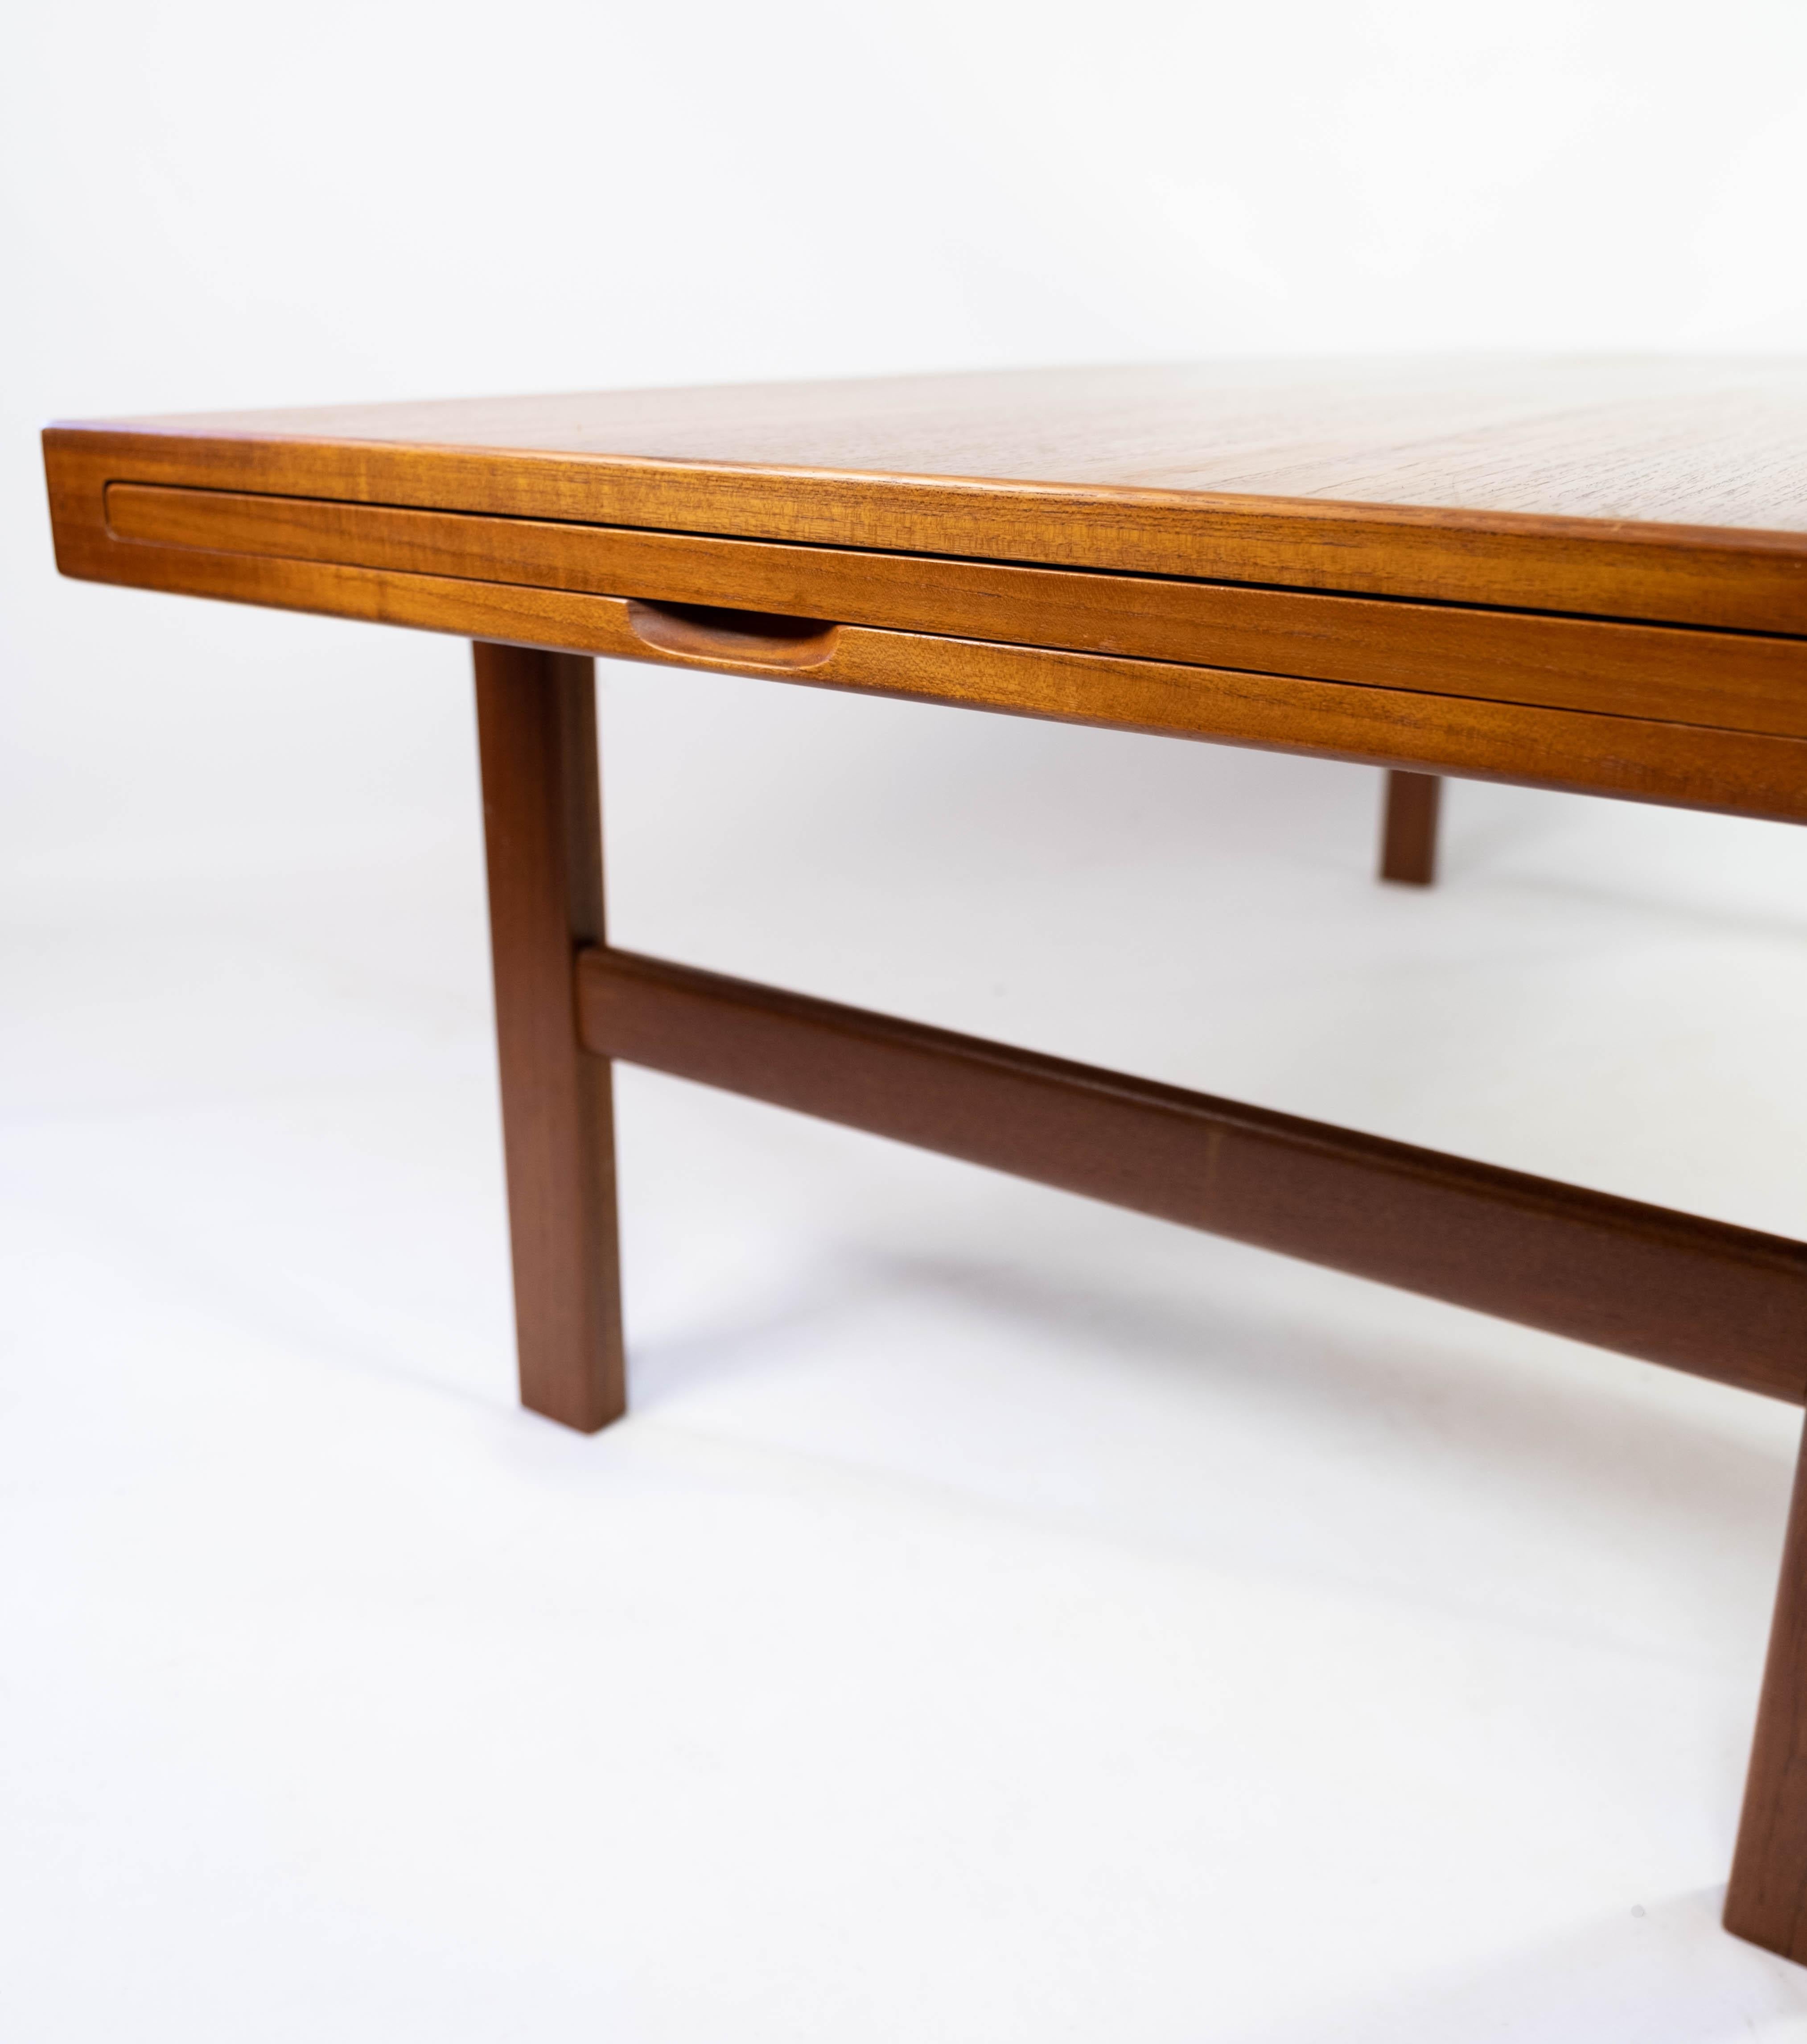 Coffee Table Made In Teak With Extension Plate, Danish Design From 1960s For Sale 1